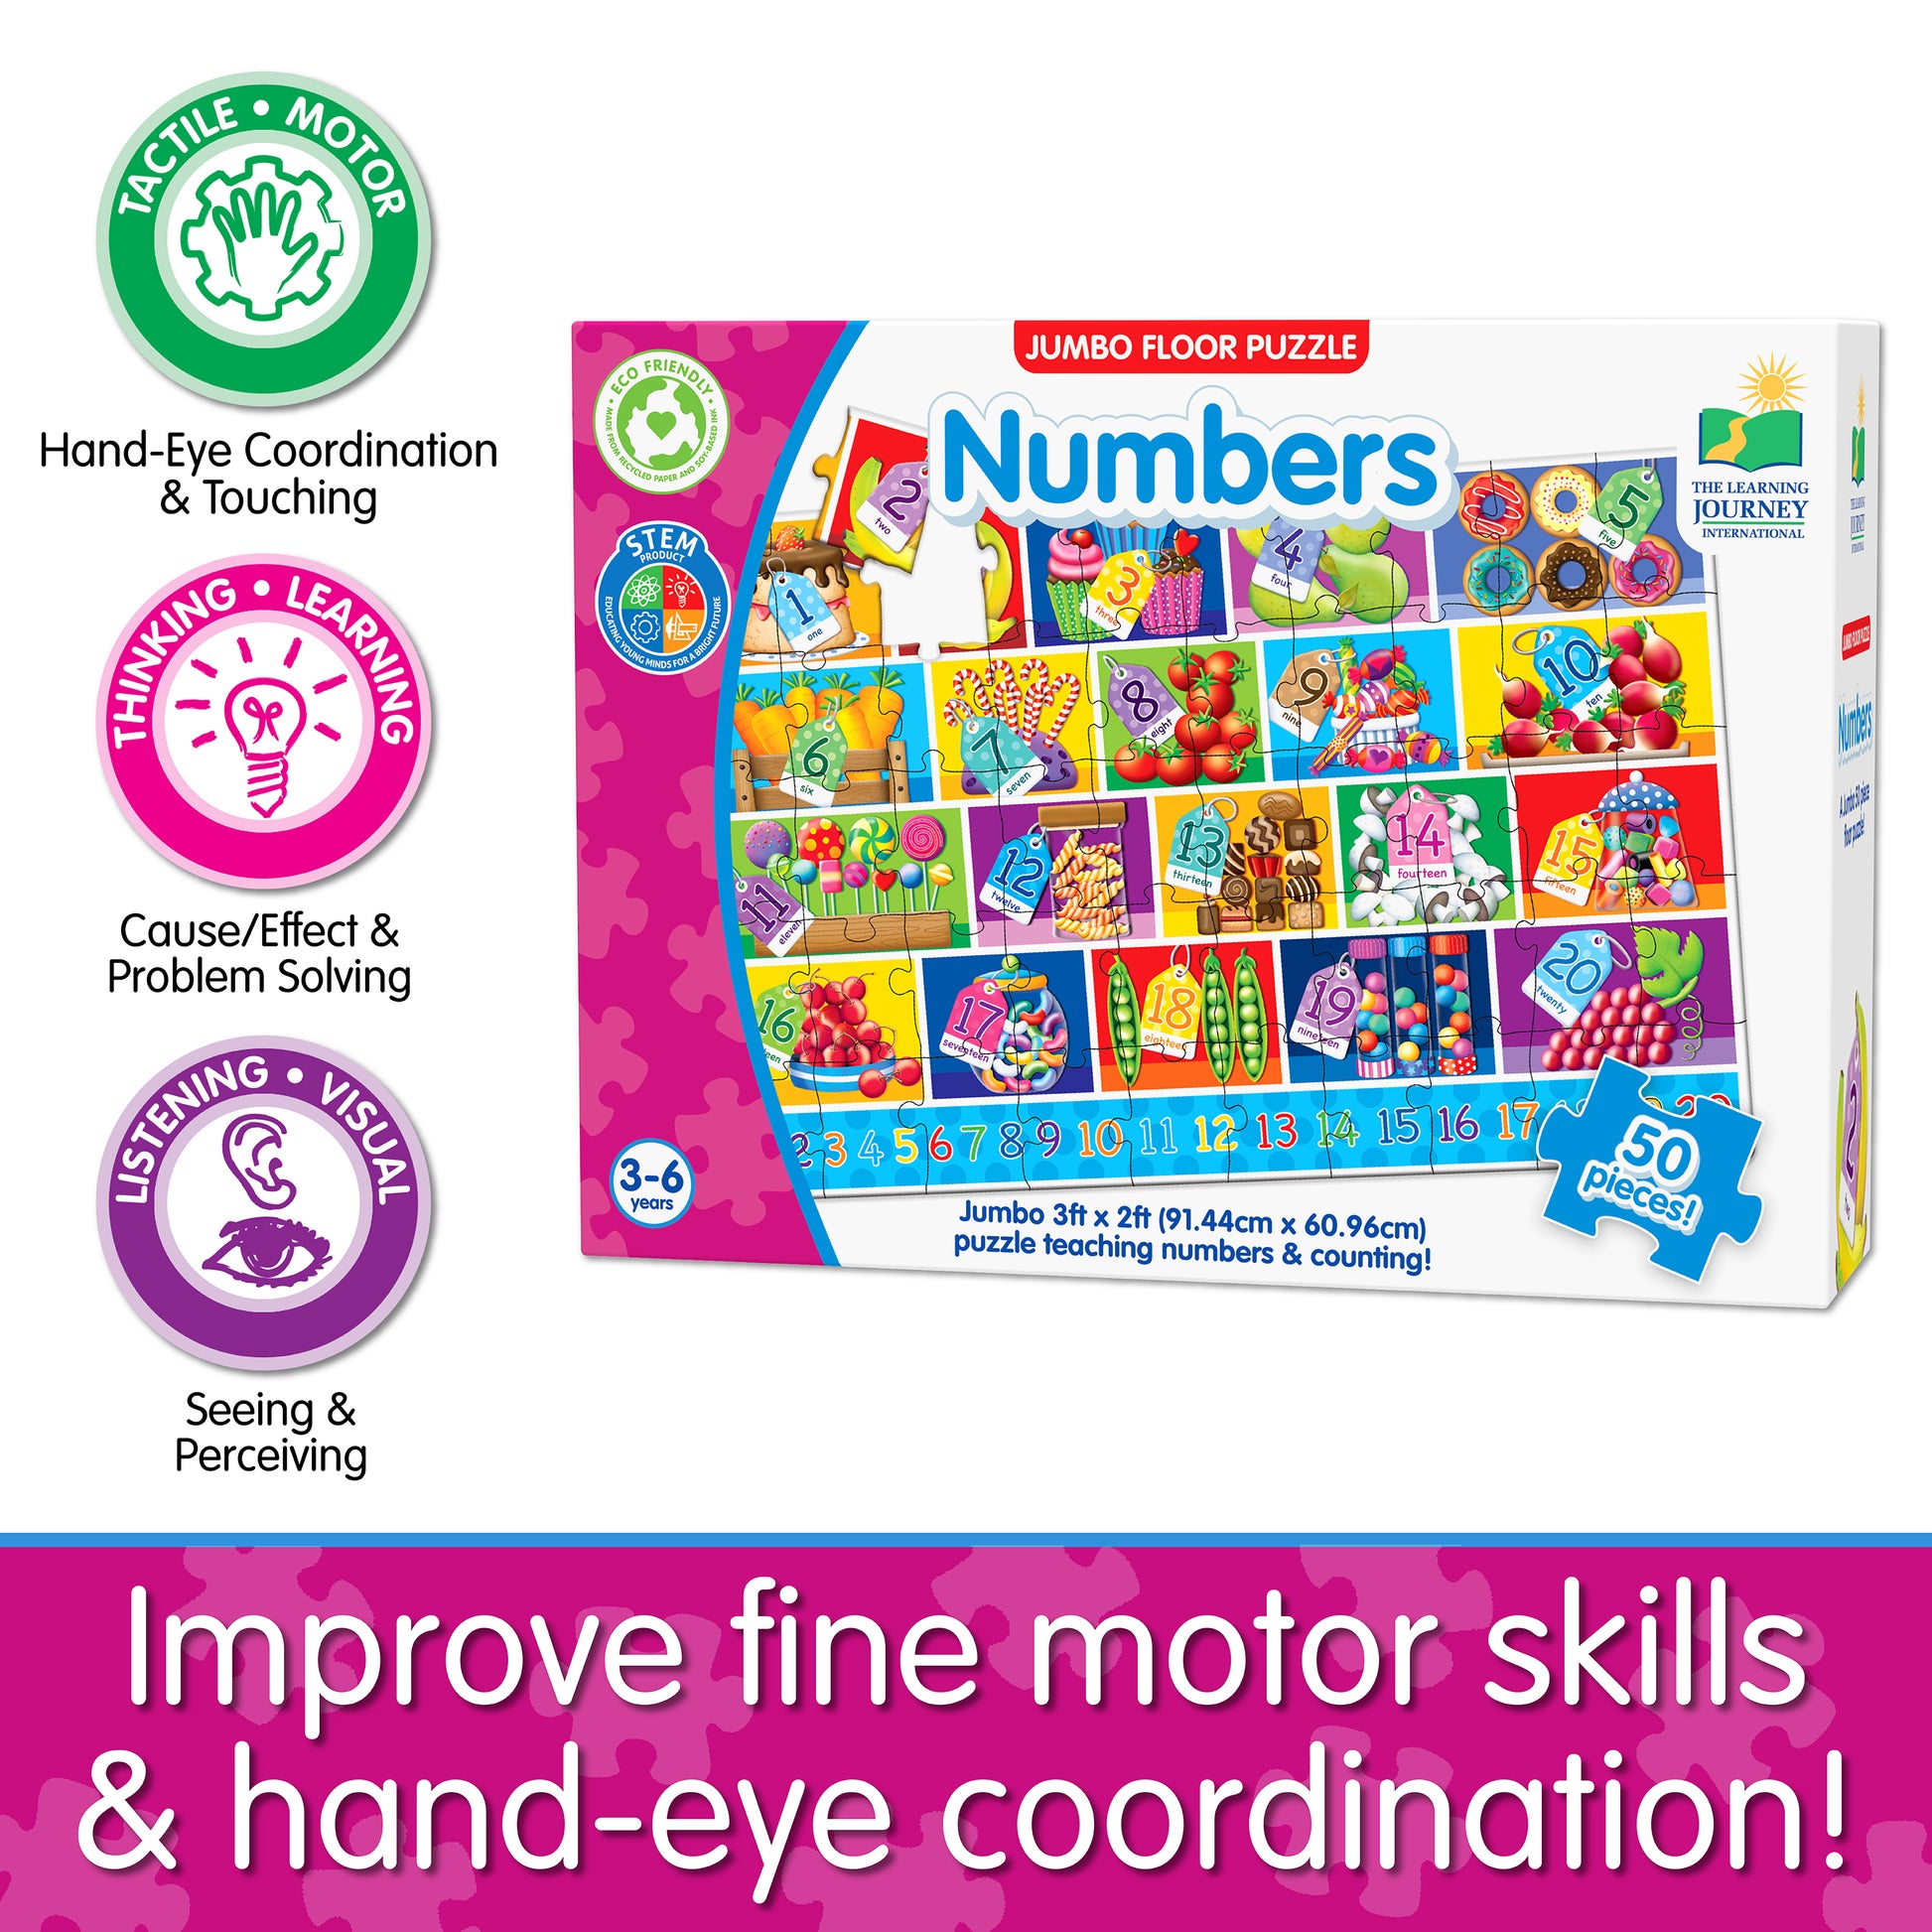 Infographic of Jumbo Floor Puzzle - Numbers' educational benefits that reads, "Improve fine motor skills and hand-eye coordination!"